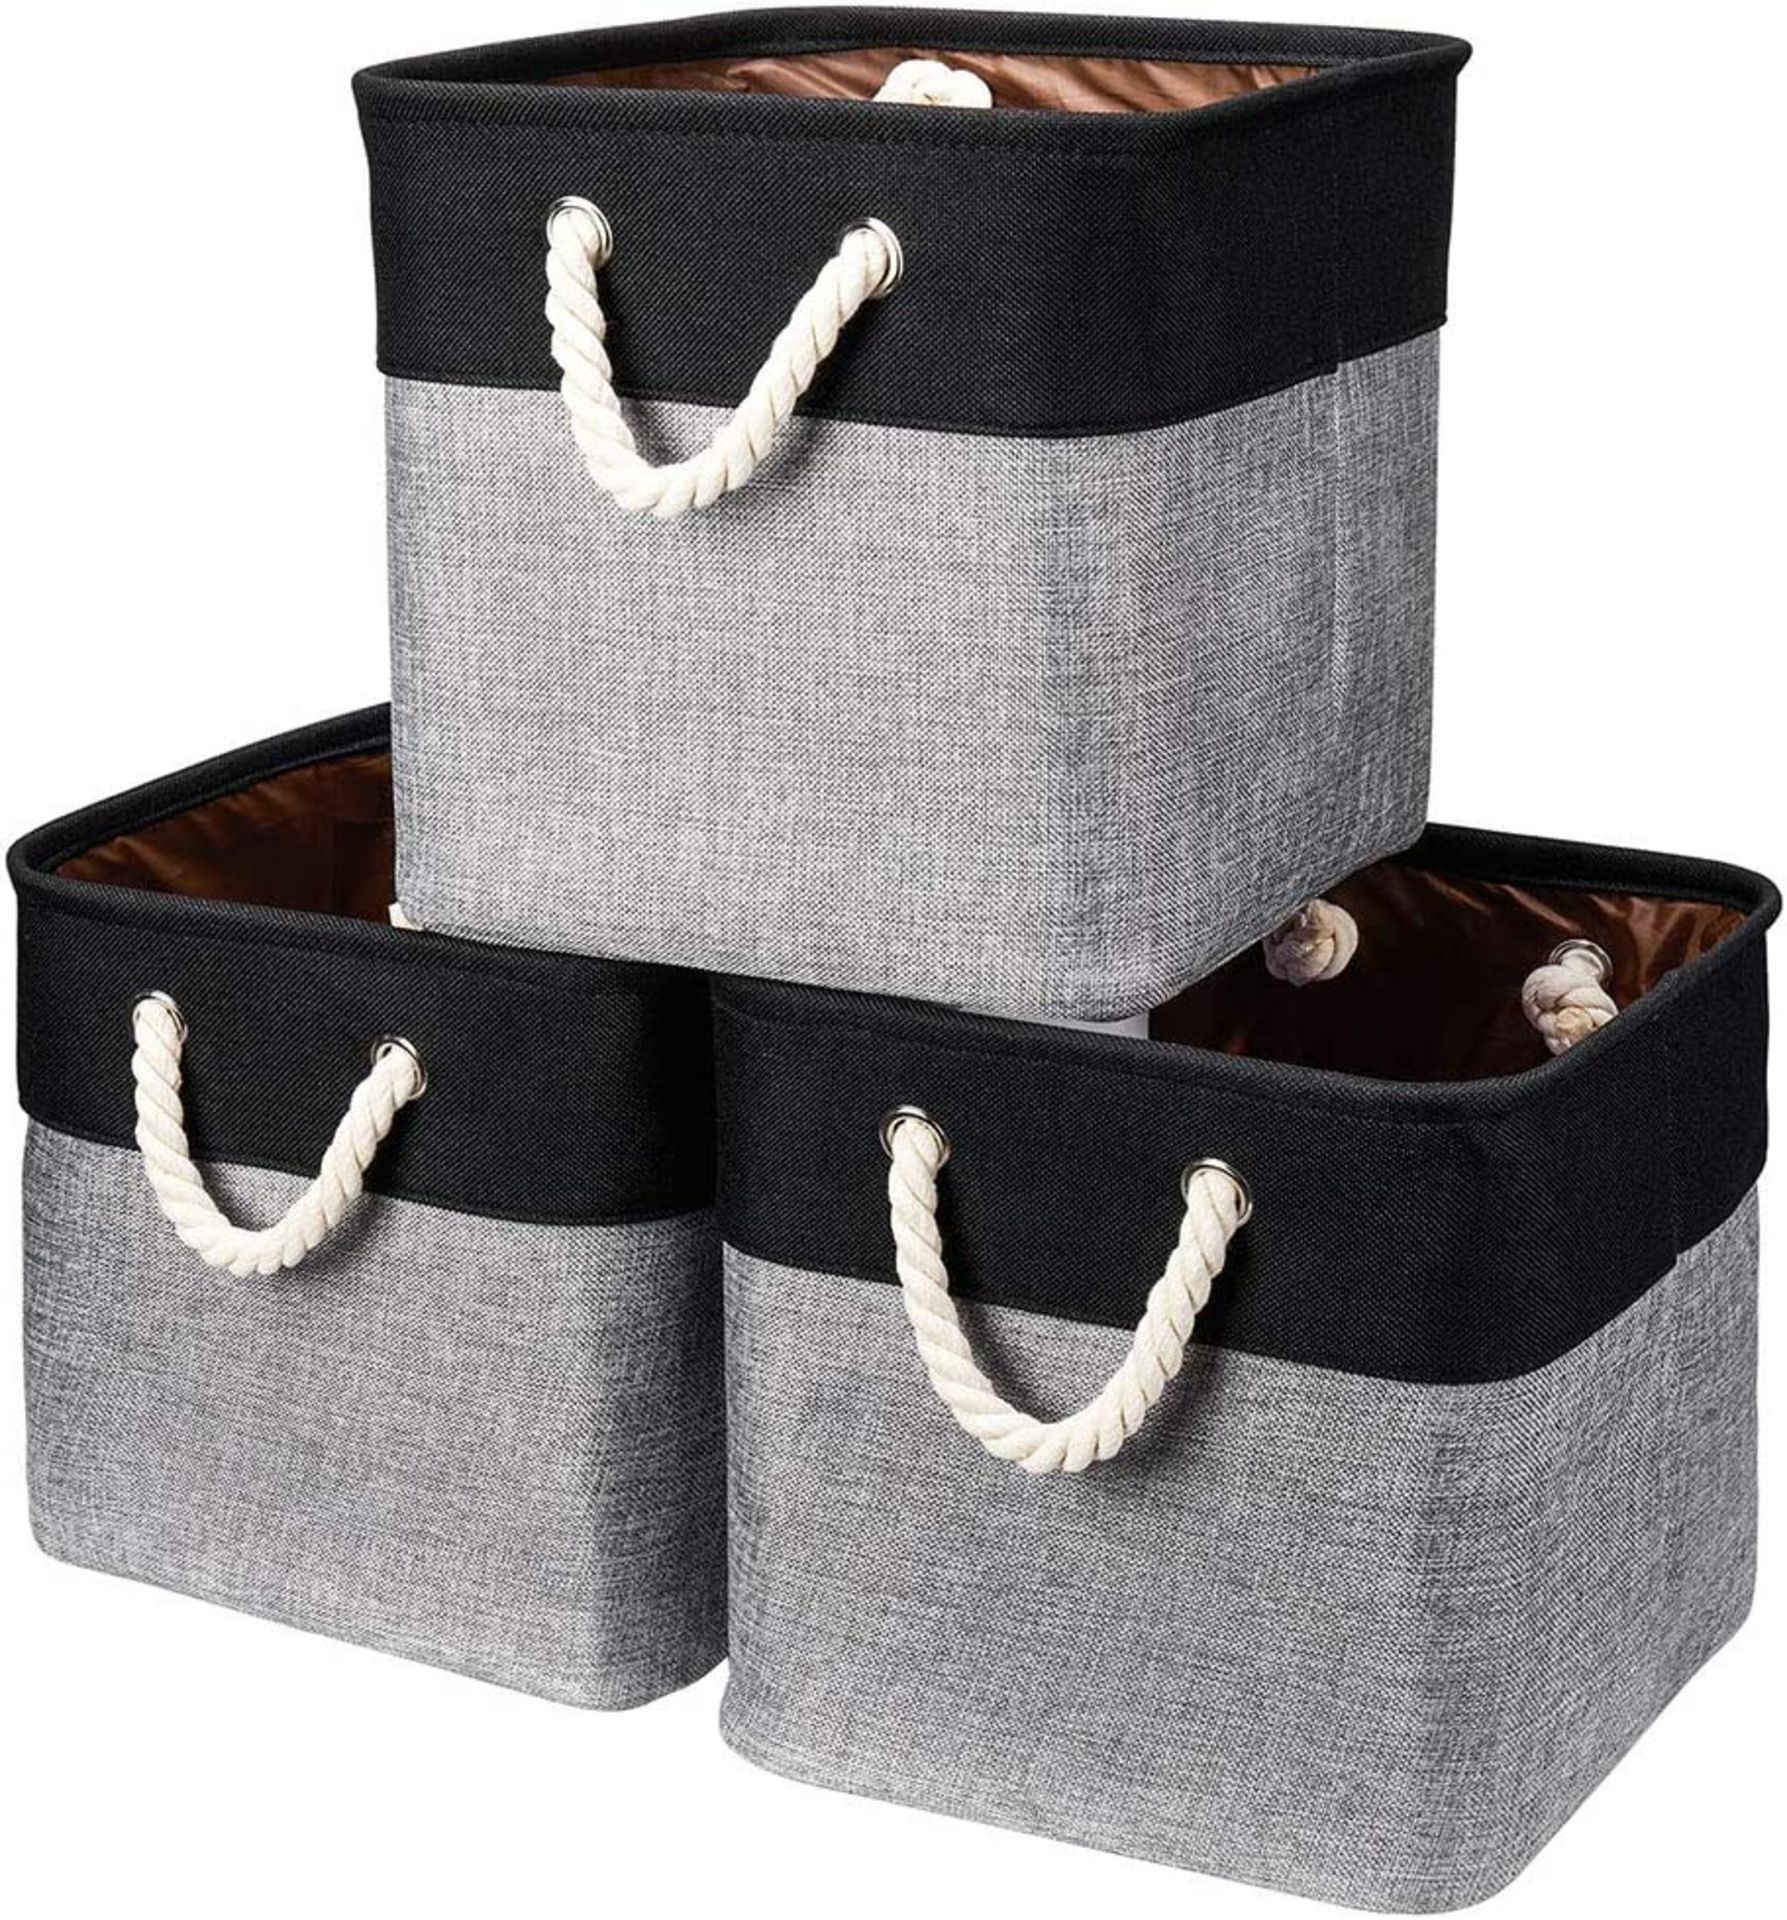 RRP £24.99 Robuy Storage Cube Basket Set of 3 Foldable Canvas Fabric Boxes Cotton Rope Handles